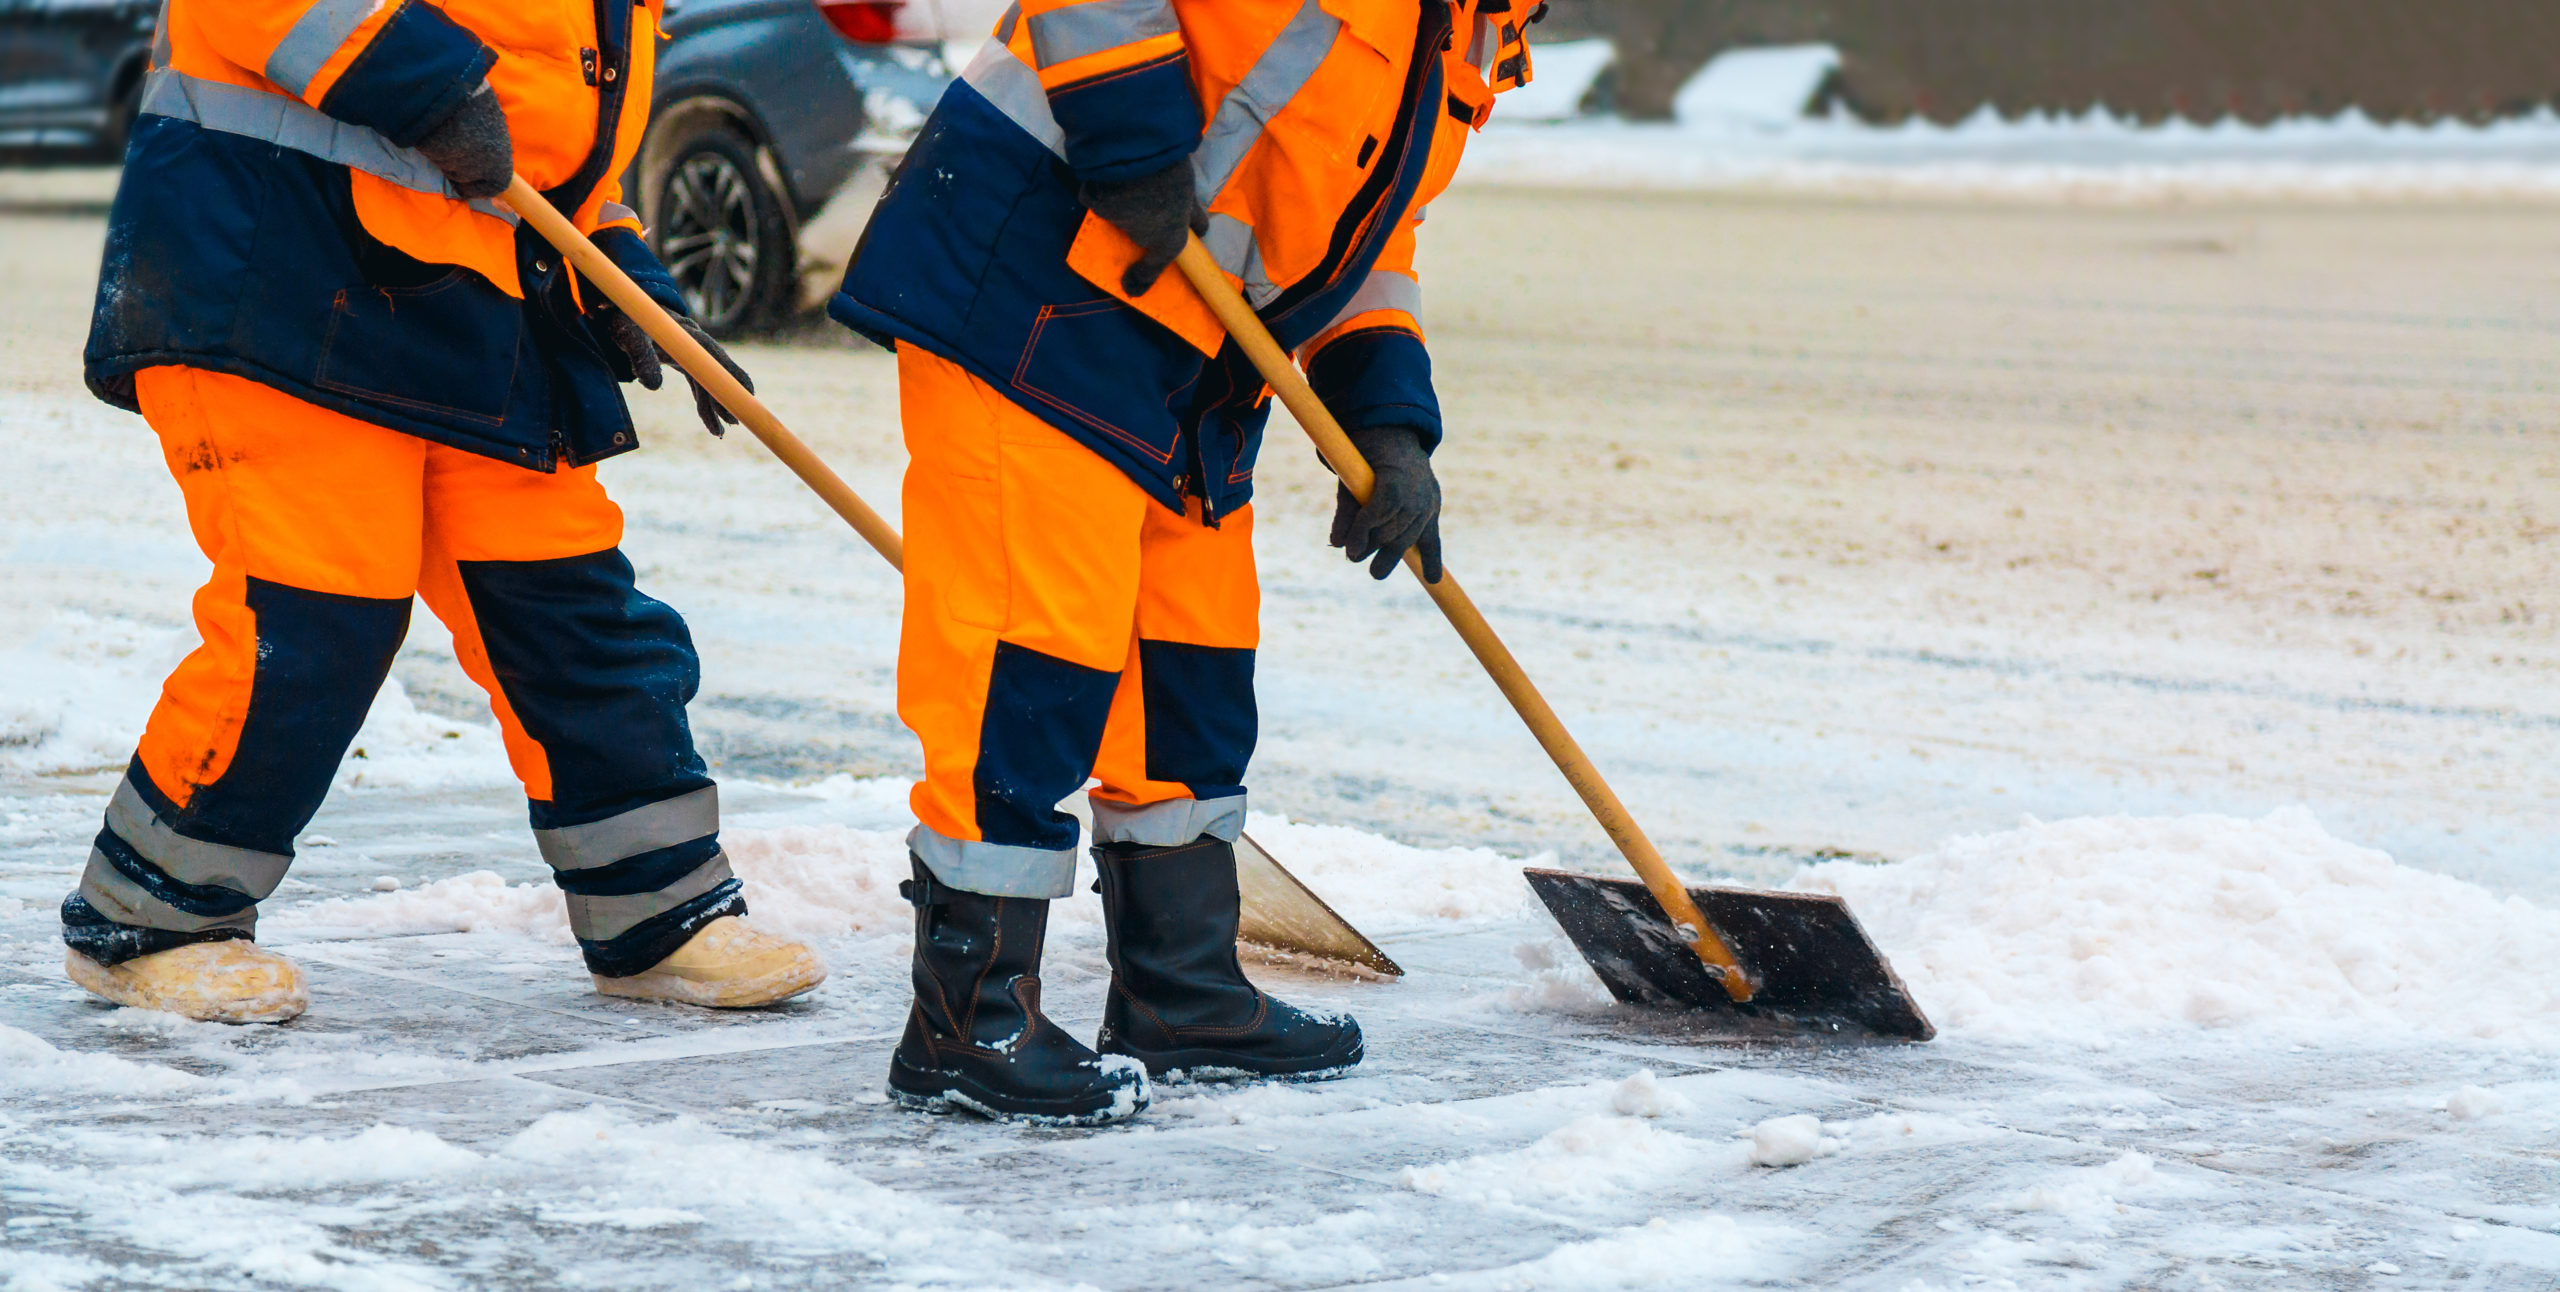 Emergency preparedness team sweeping snow from road in winter, cleaning city streets and roads after snow storm.